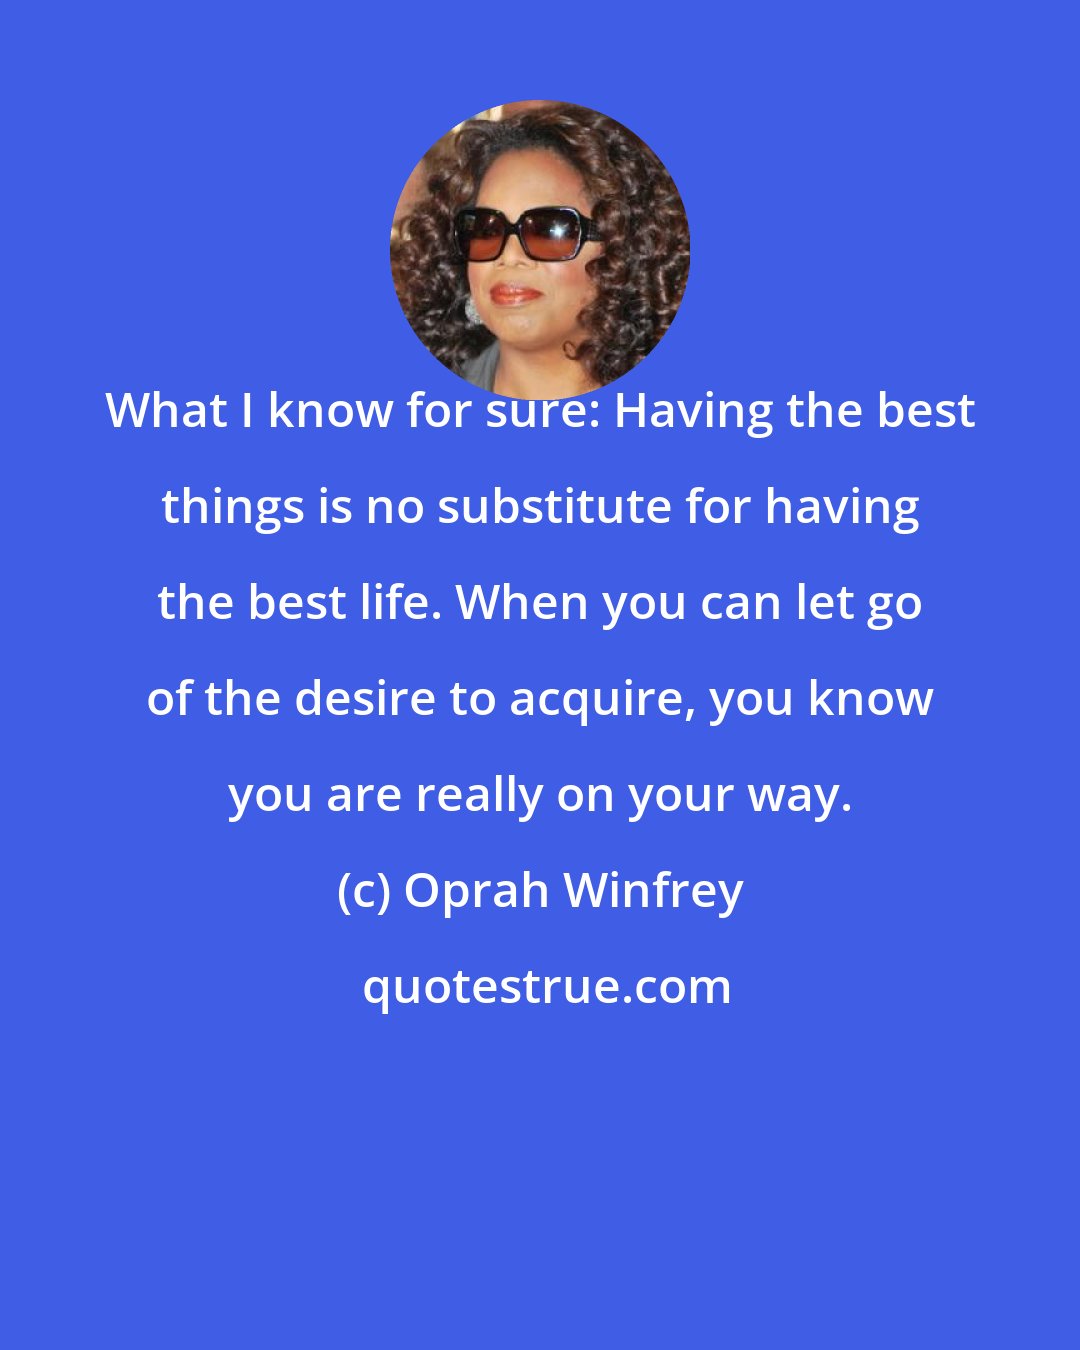 Oprah Winfrey: What I know for sure: Having the best things is no substitute for having the best life. When you can let go of the desire to acquire, you know you are really on your way.